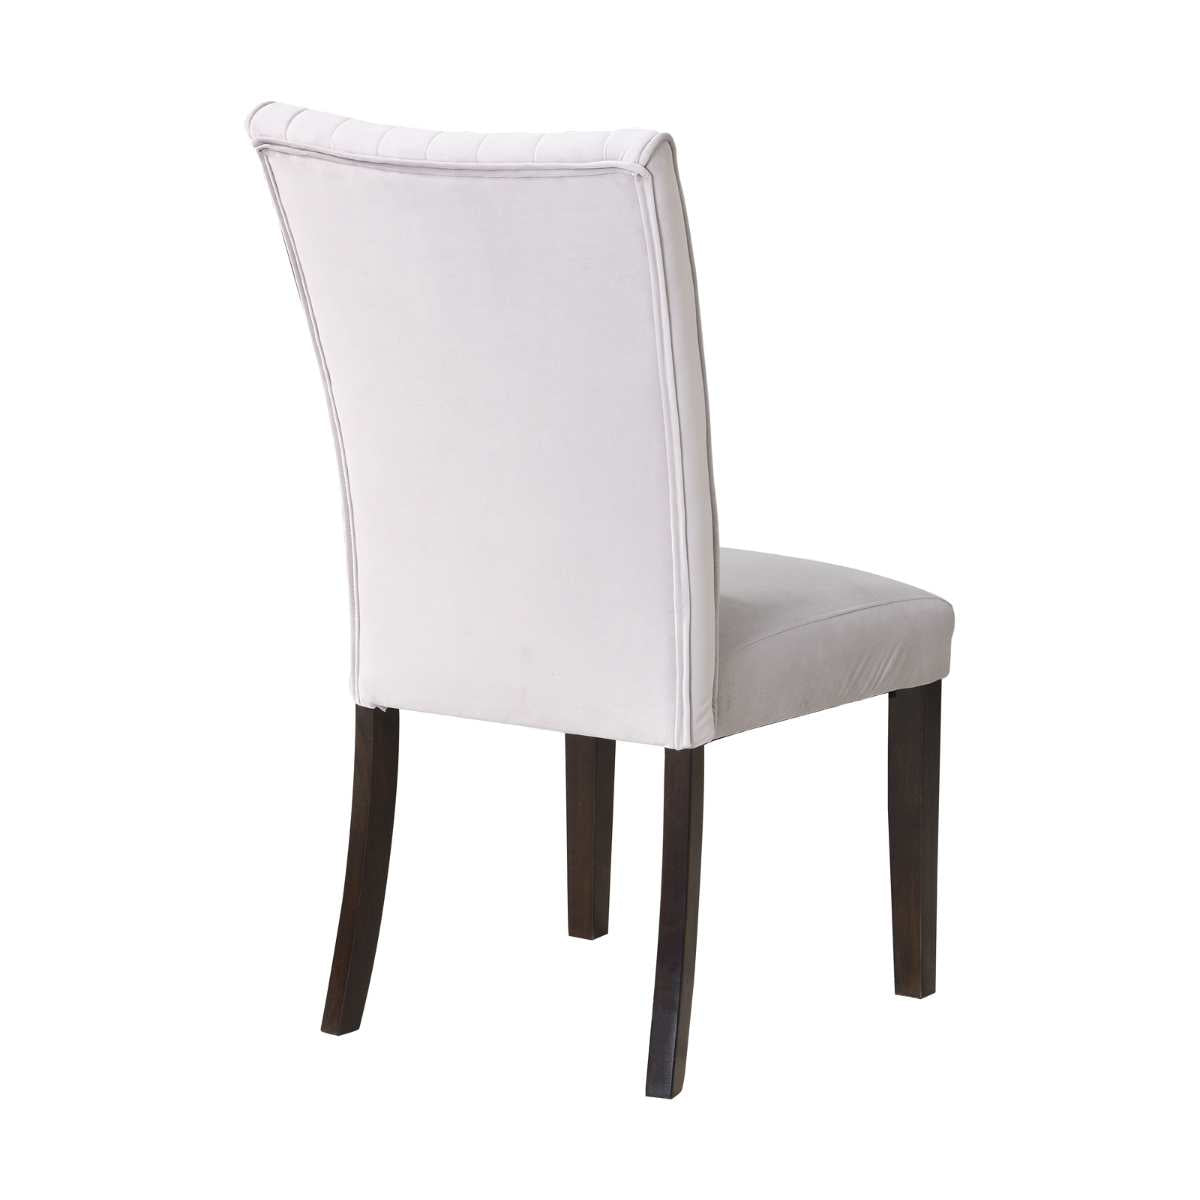 Hyperion Dining Collection 5766